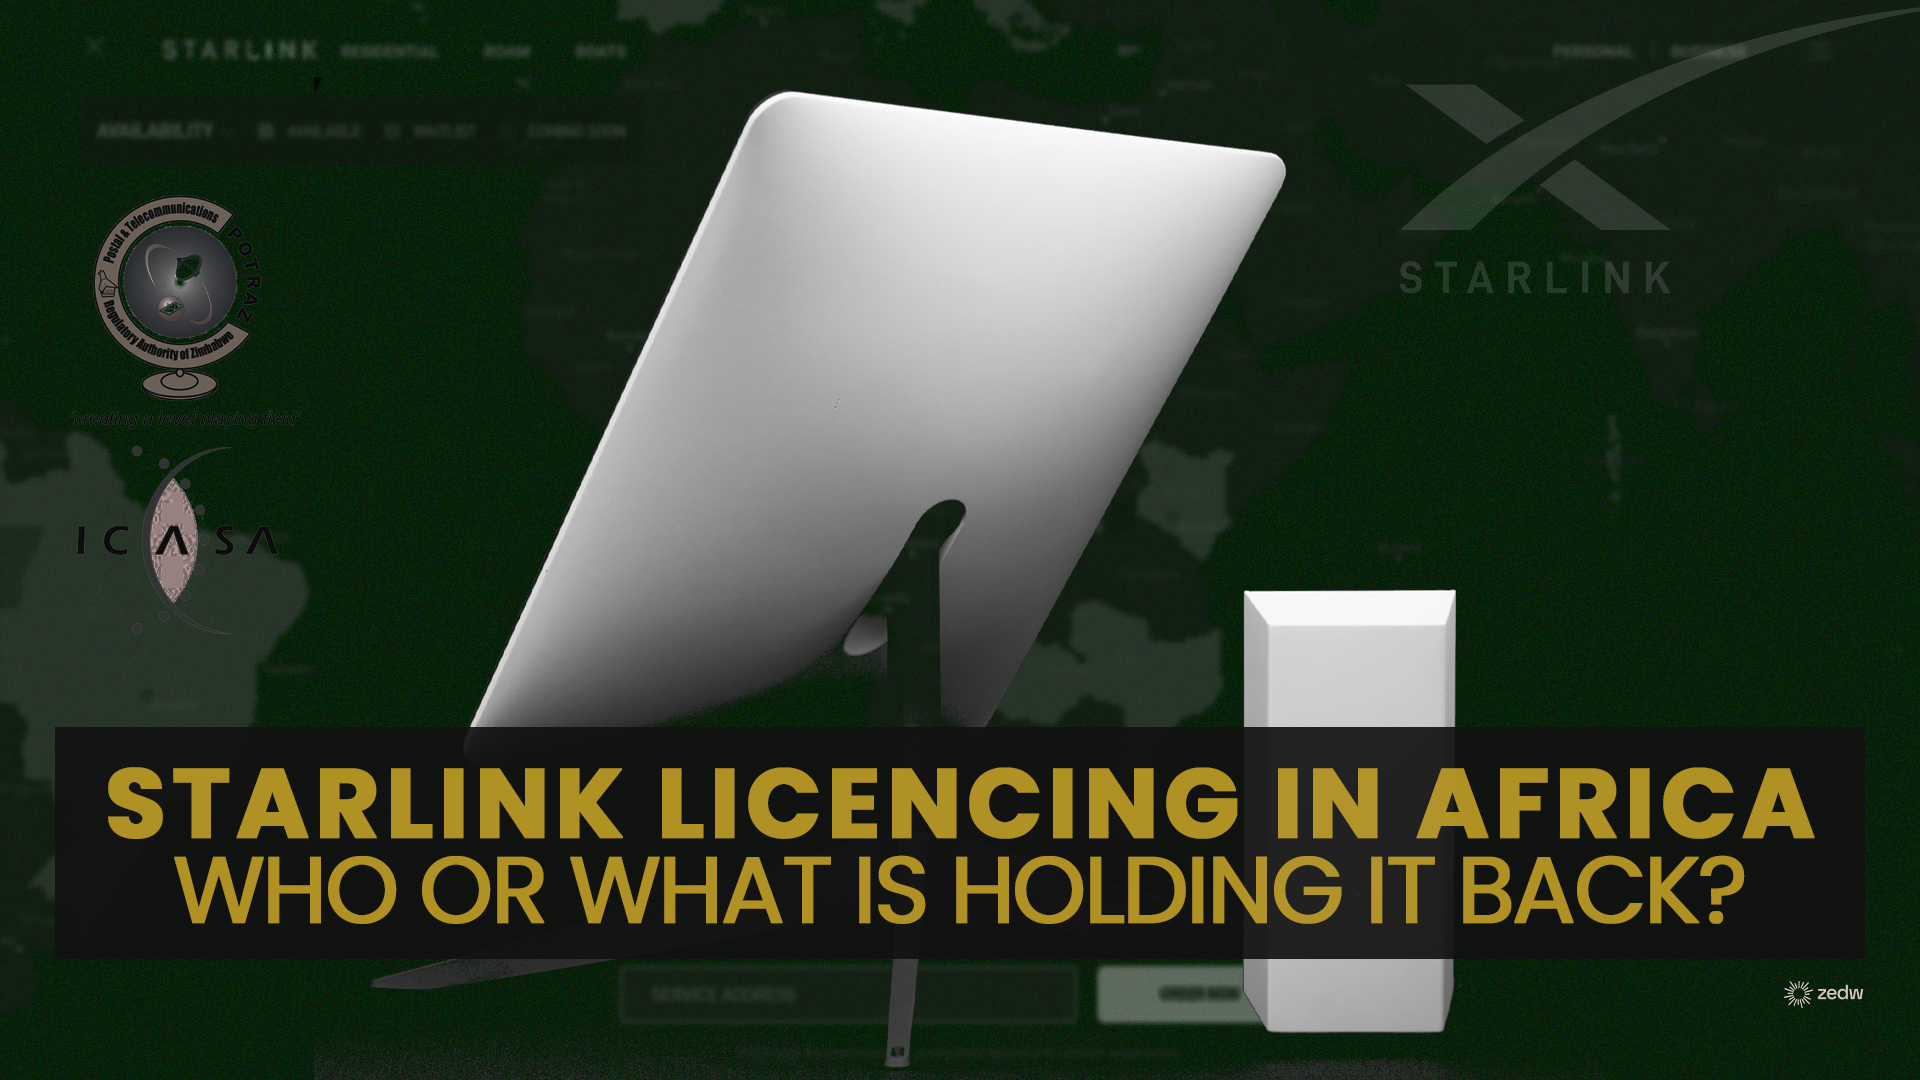 State of Starlink’s licensing in Africa. Some countries are glad it exists, others not so much.